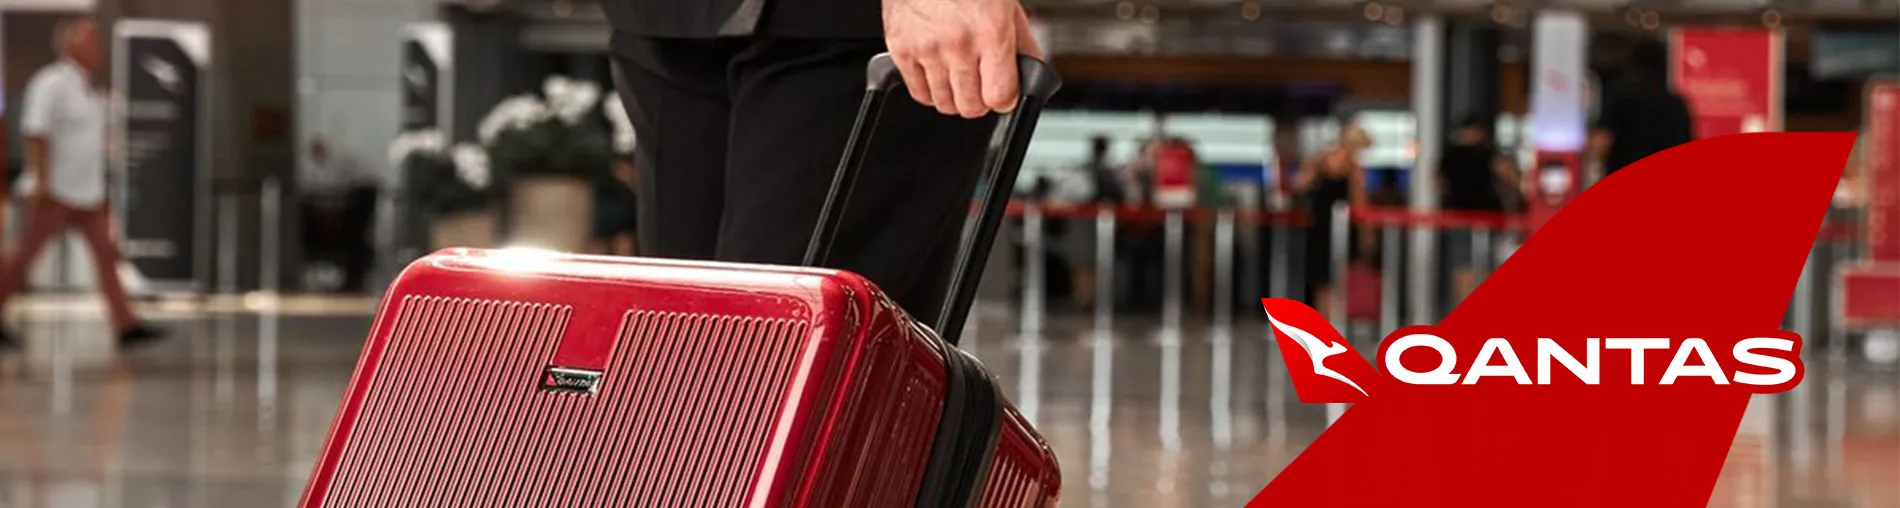 What You Need to Know About Qantas’ Carry-On Baggage Allowance